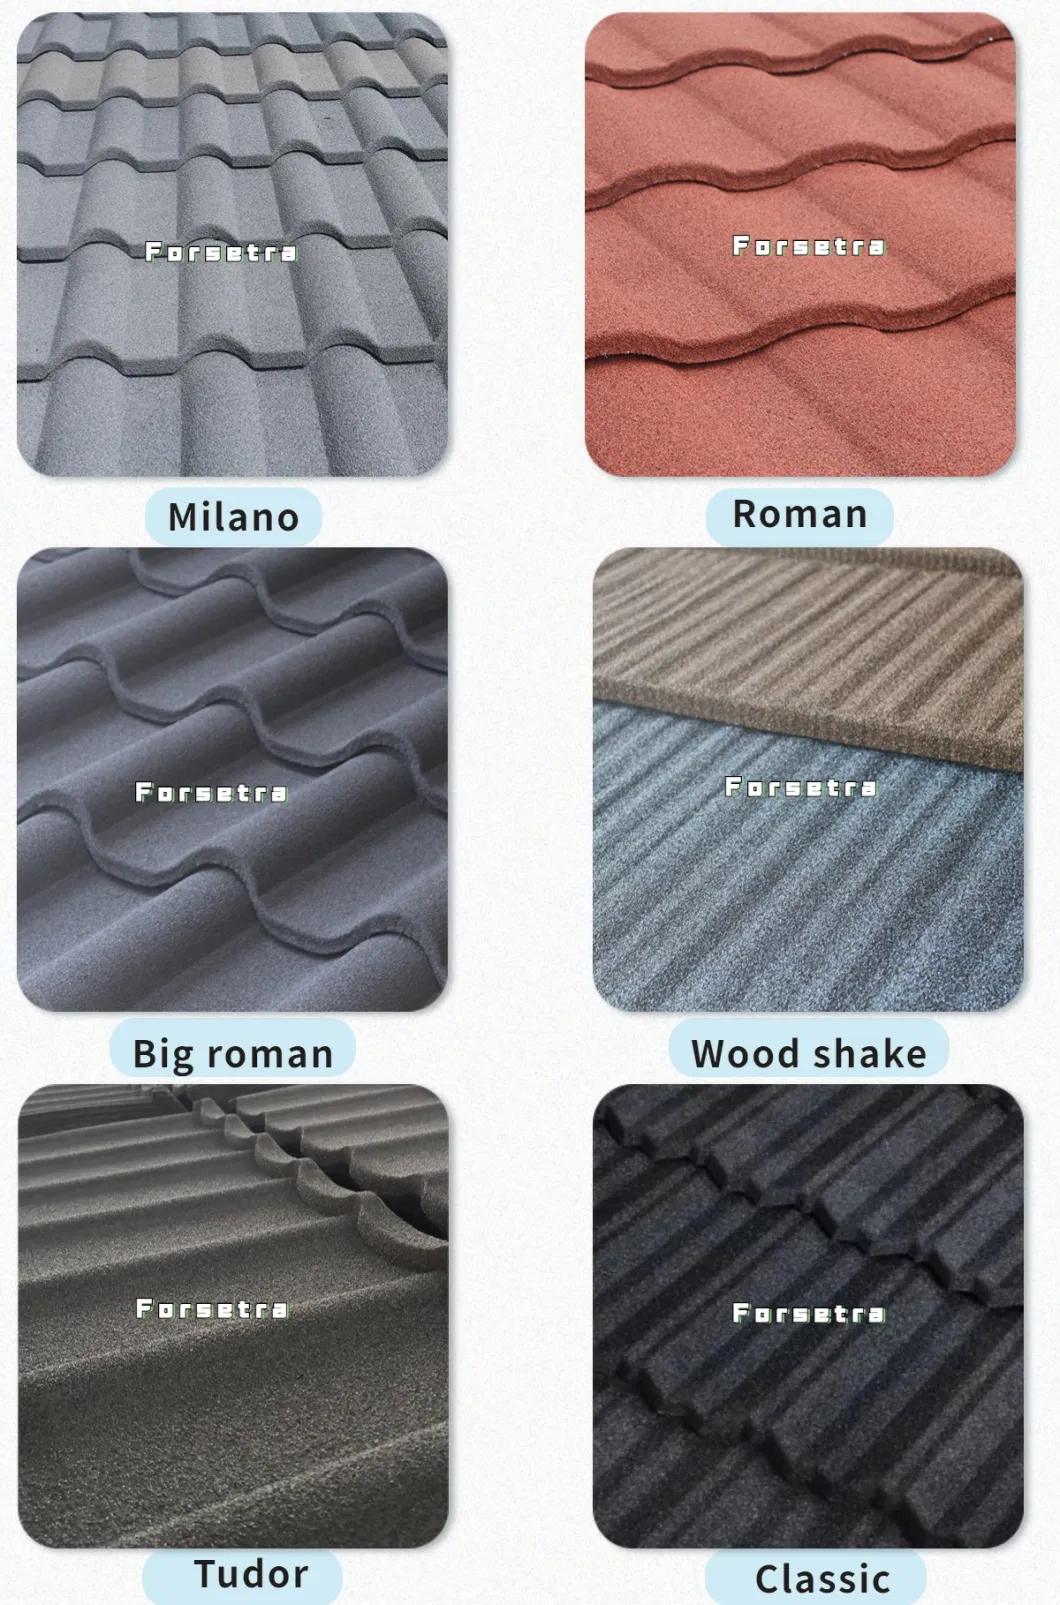 Green Building Materials Light Soundproof Roman Roofing Tile with Solid Colorful Stone and Fingerprint Resistance Steel